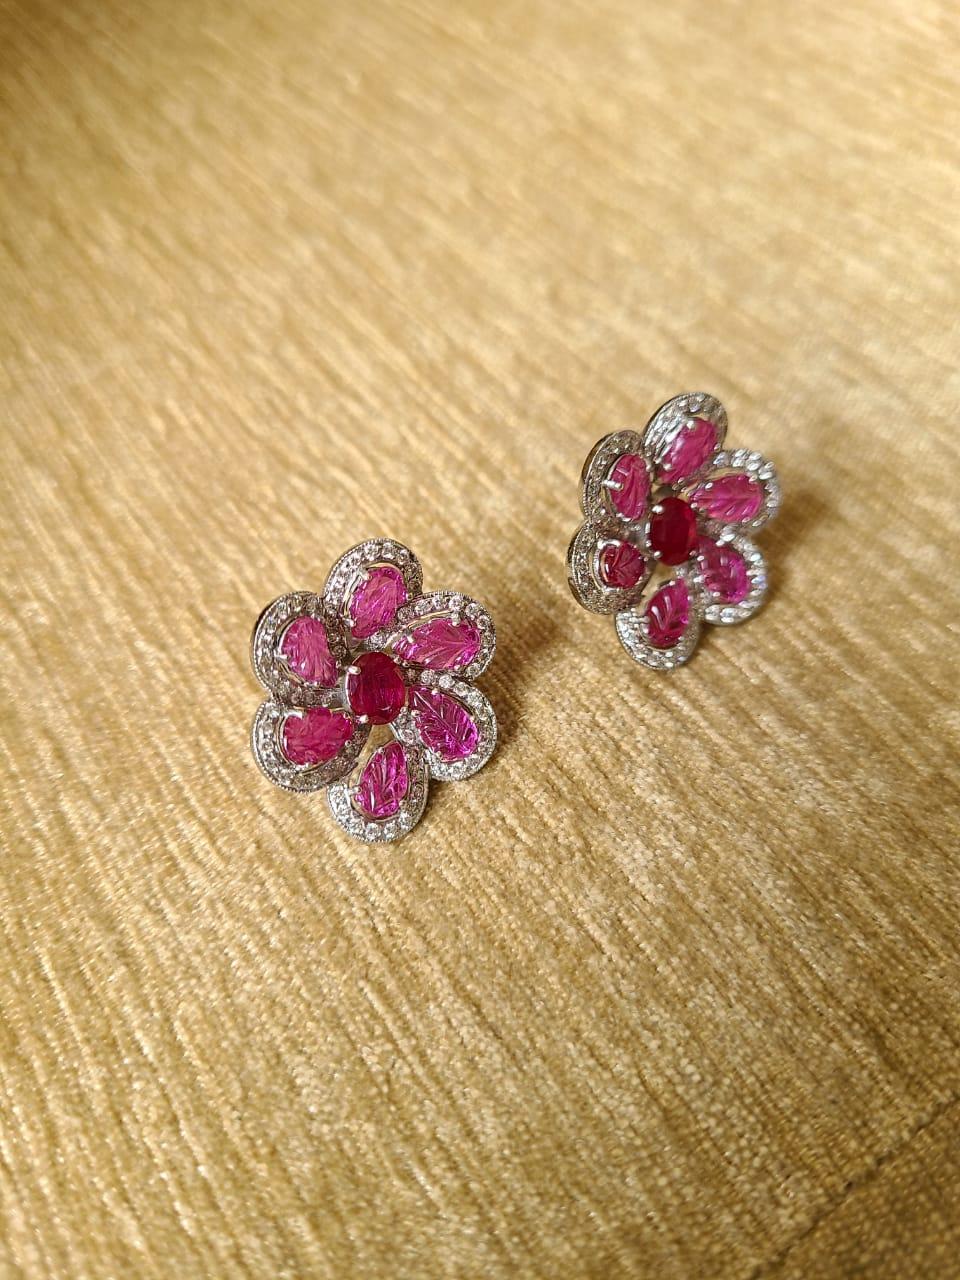 A very gorgeous and wearable pair of Ruby and Diamond Stud Earrings set in 18K Gold. The combined weight of the Rubies is 6.09 carats. The Rubies are completely natural without any treatment, and are of Mozambique origin. The weight of the Diamonds